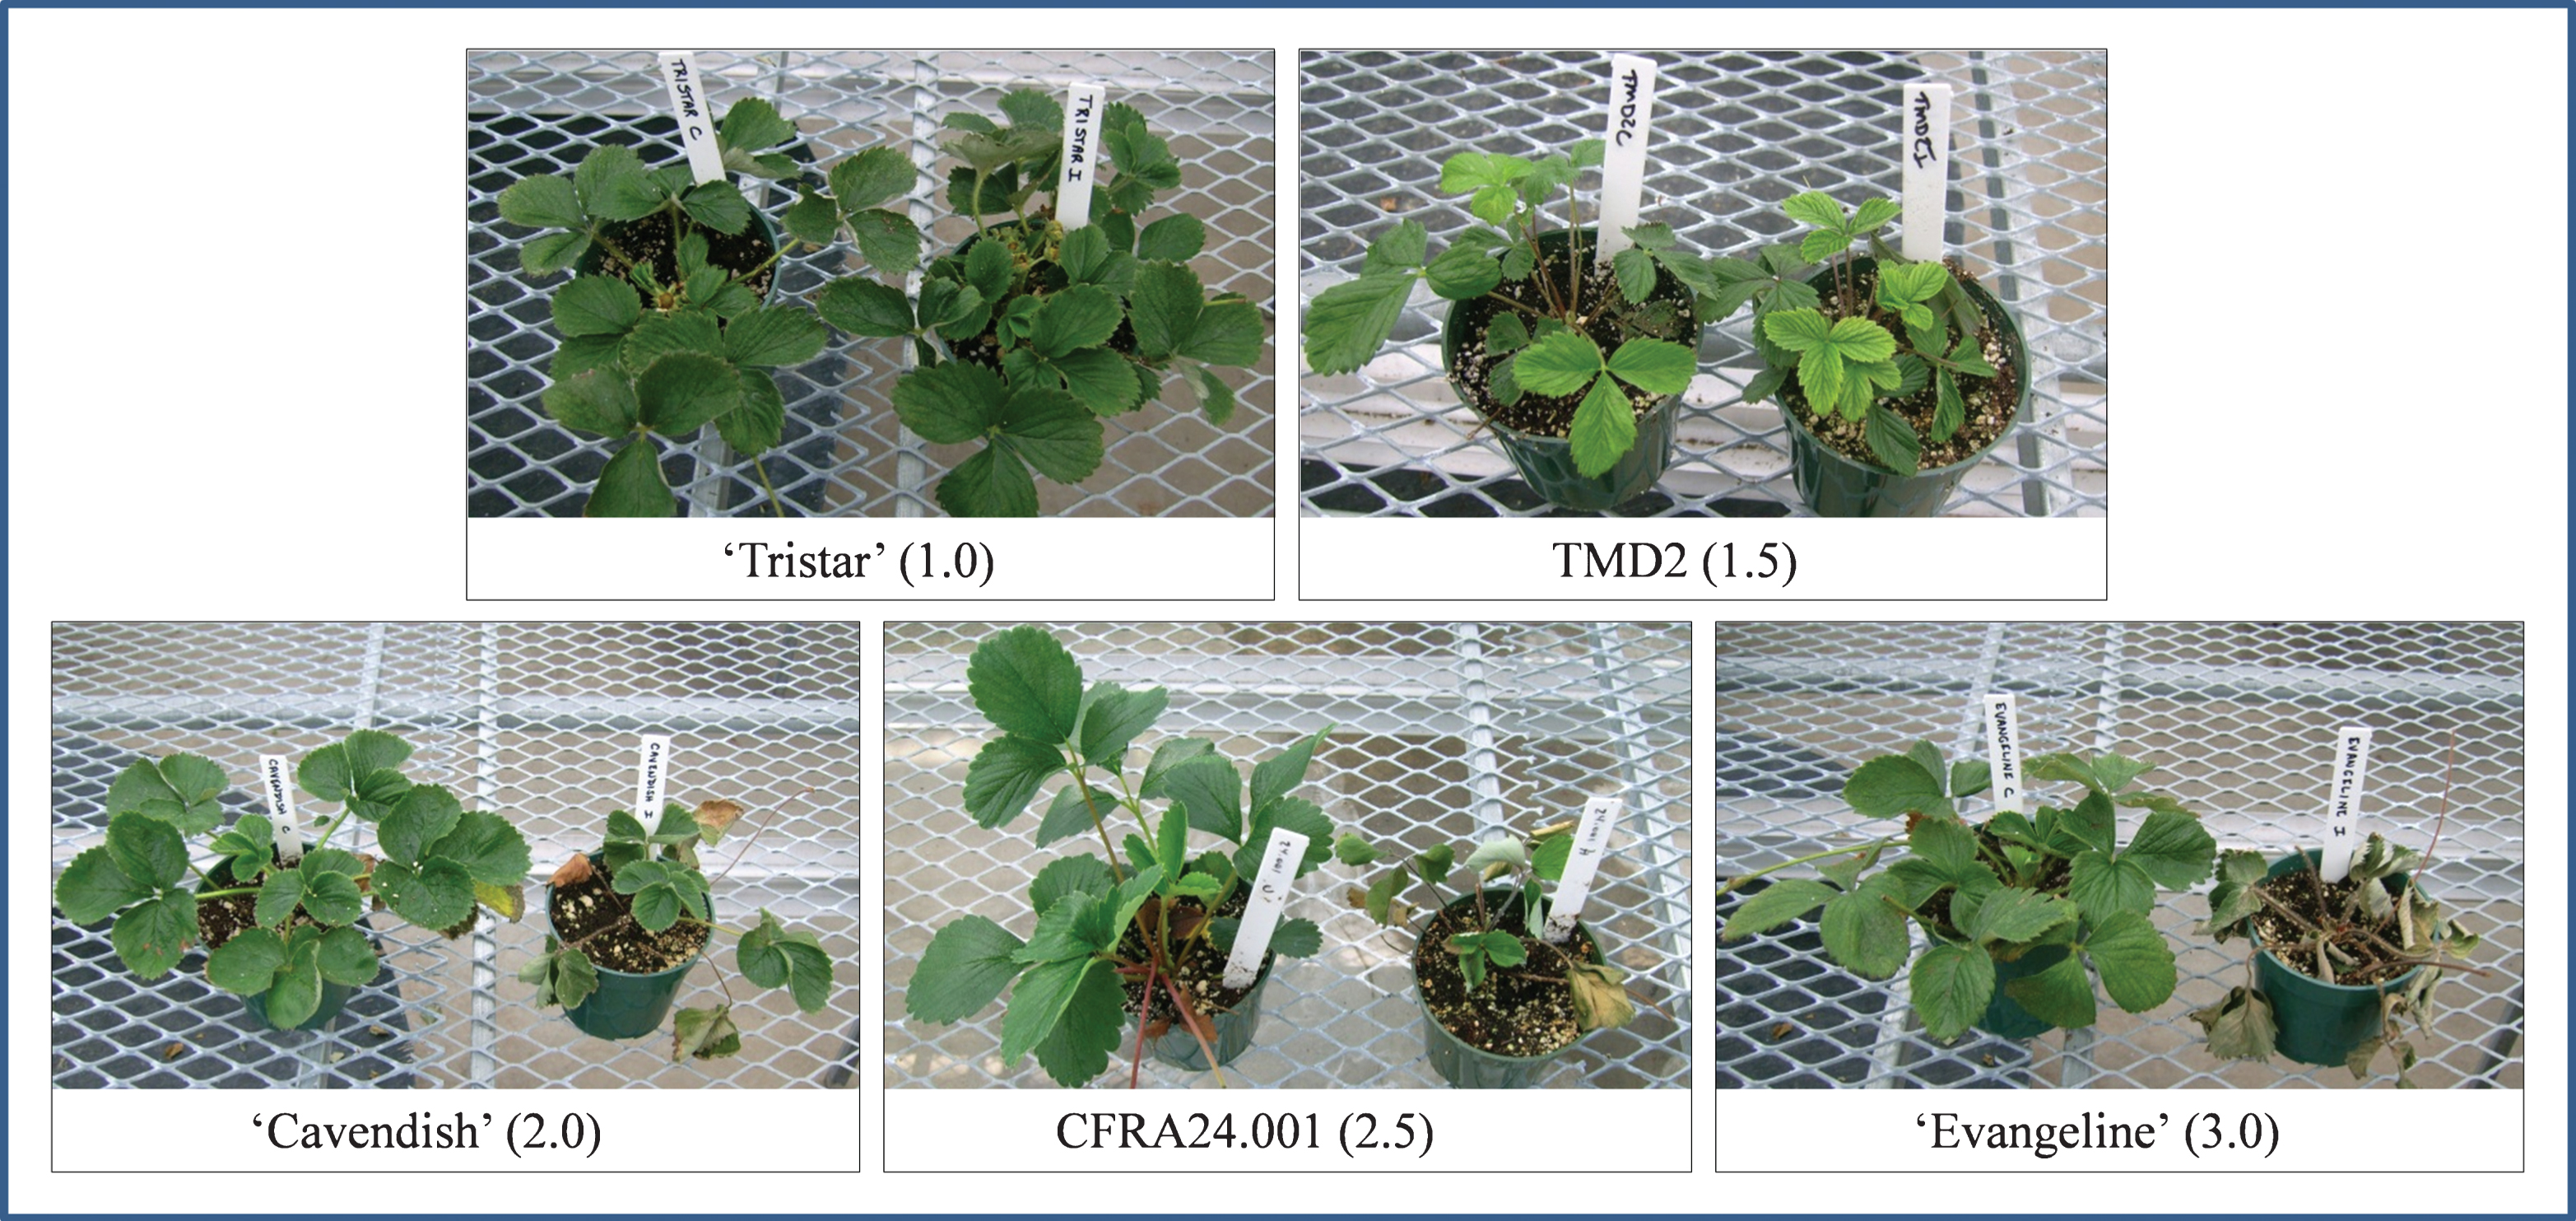 Disease ratings and examples of their respective verticillium wilt phenotypes. Within each panel, a control plant is shown on the left, and an inoculated plant of the same variety is shown on the right along with its disease rating (number in black box).